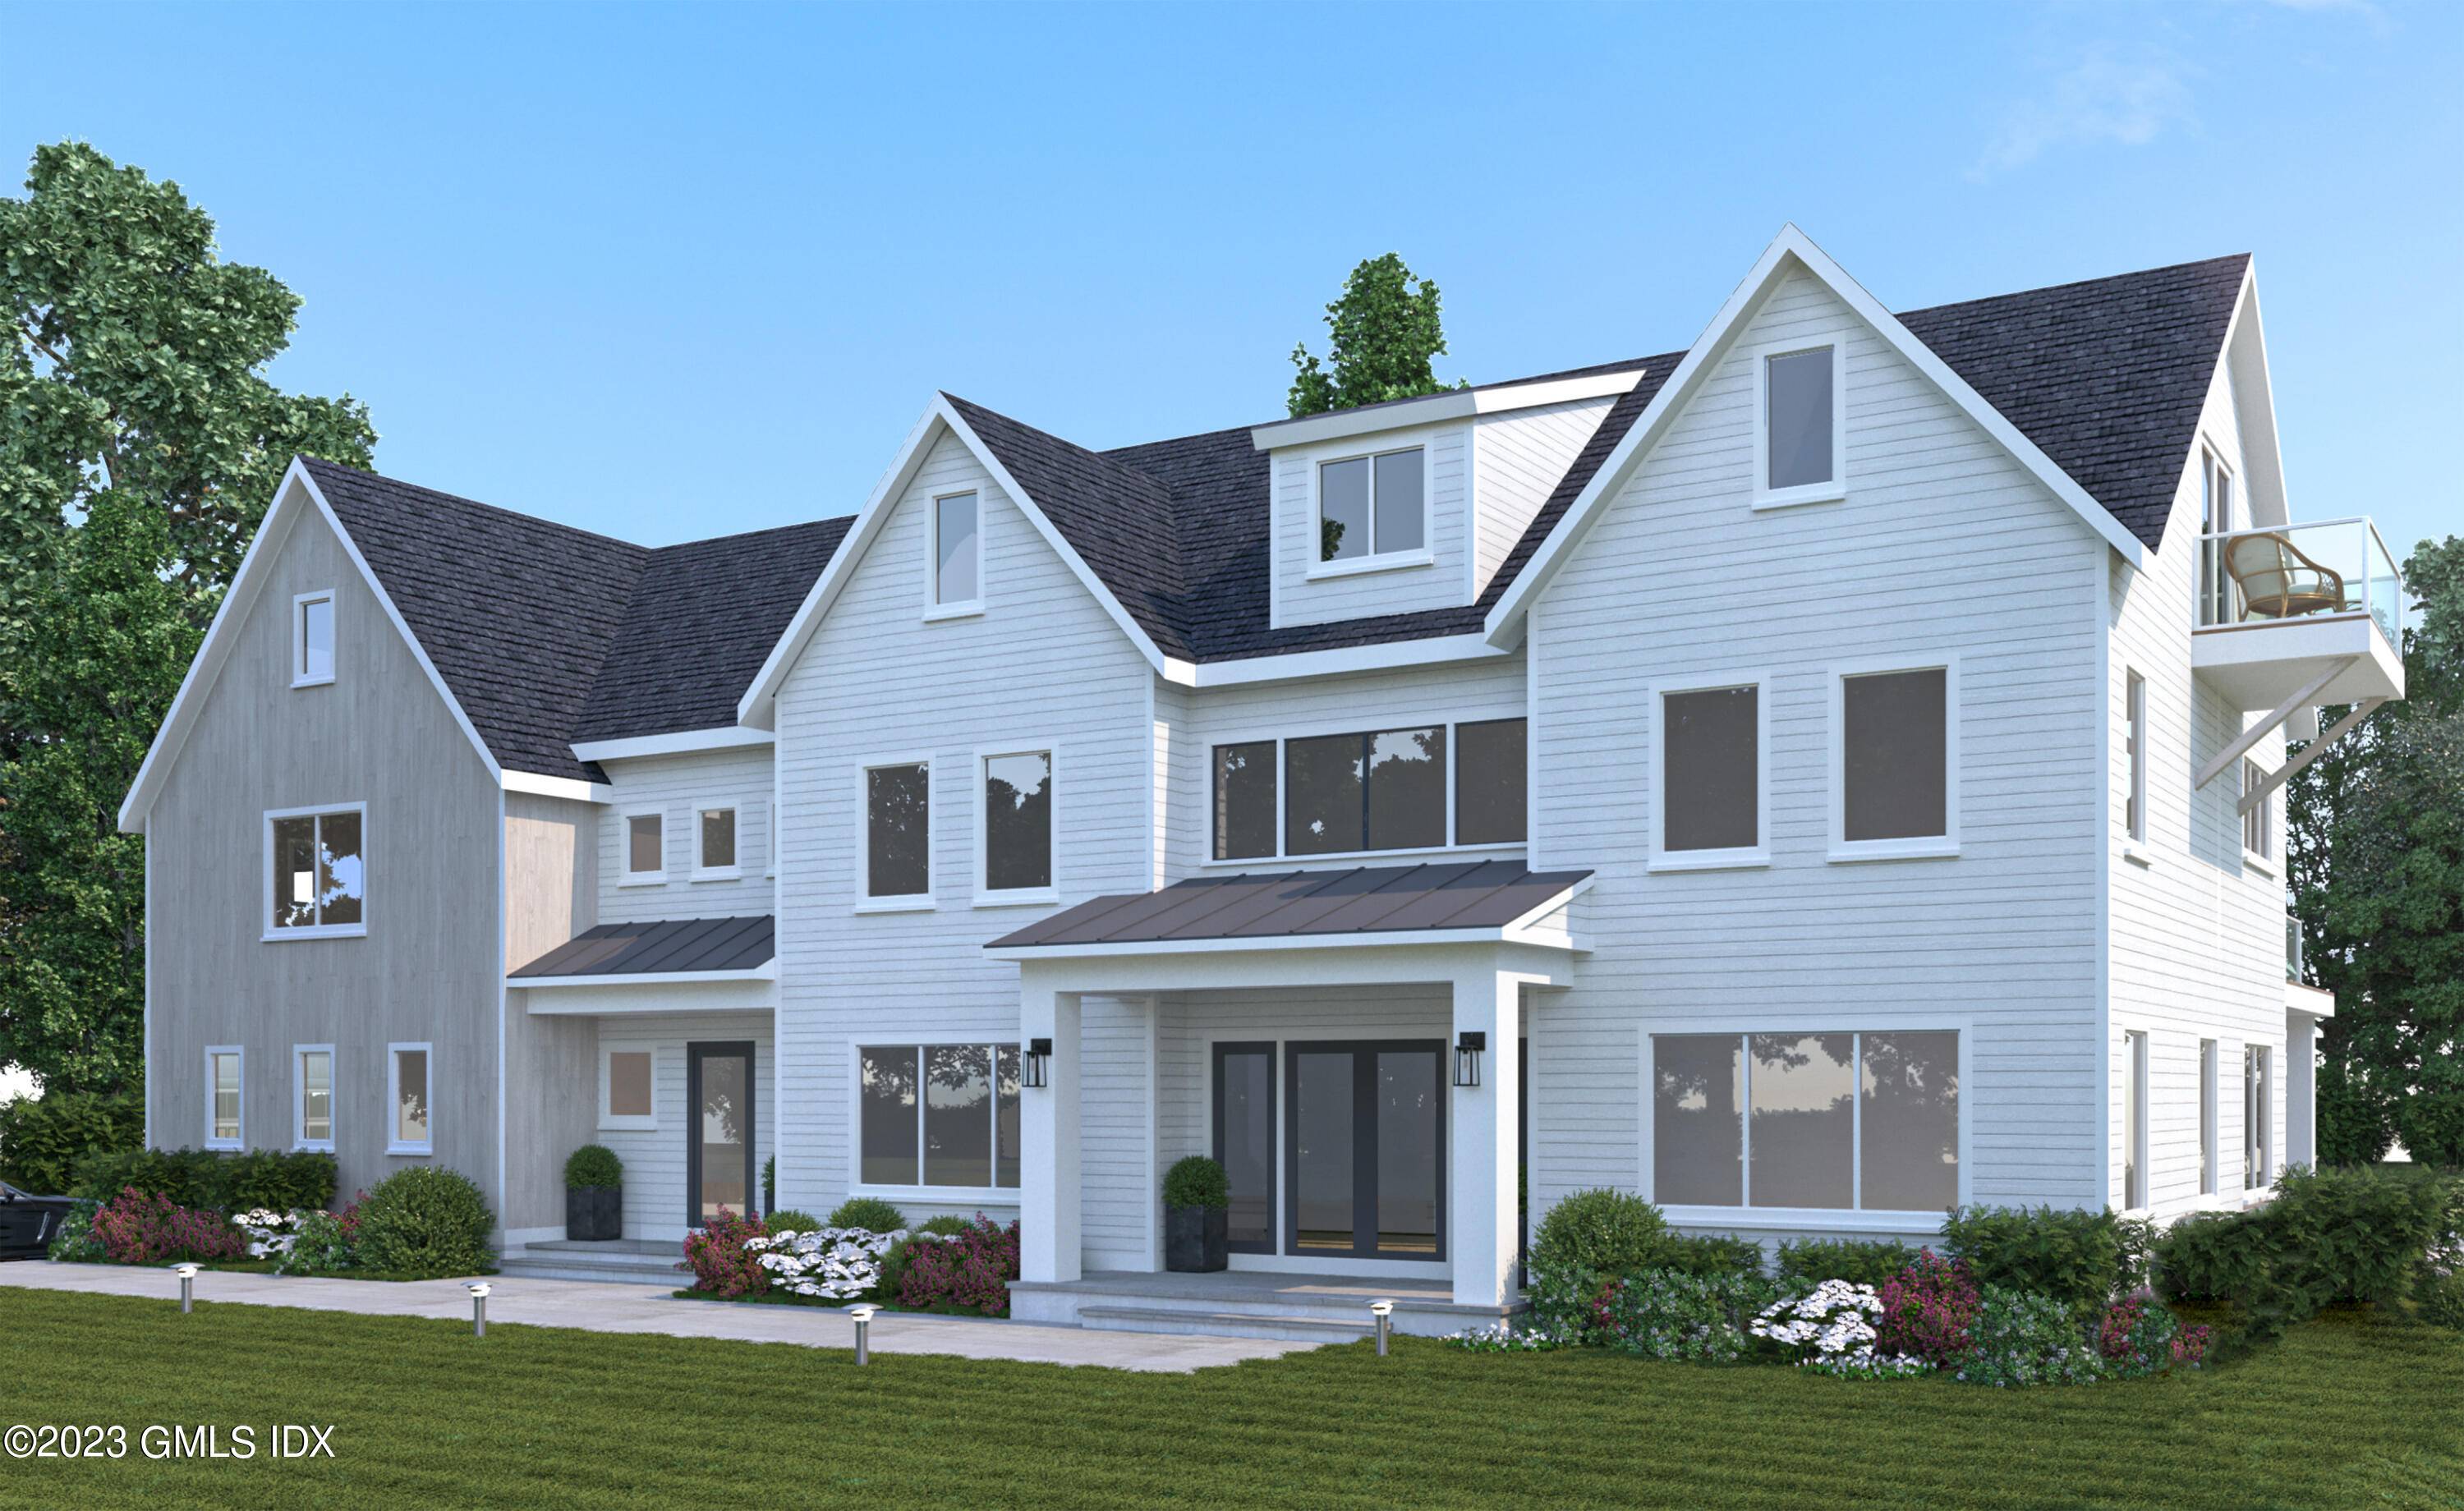 COMPLETION JULY 2023 Ultra luxurious New Construction Home with opportunity to customize to make it your own !